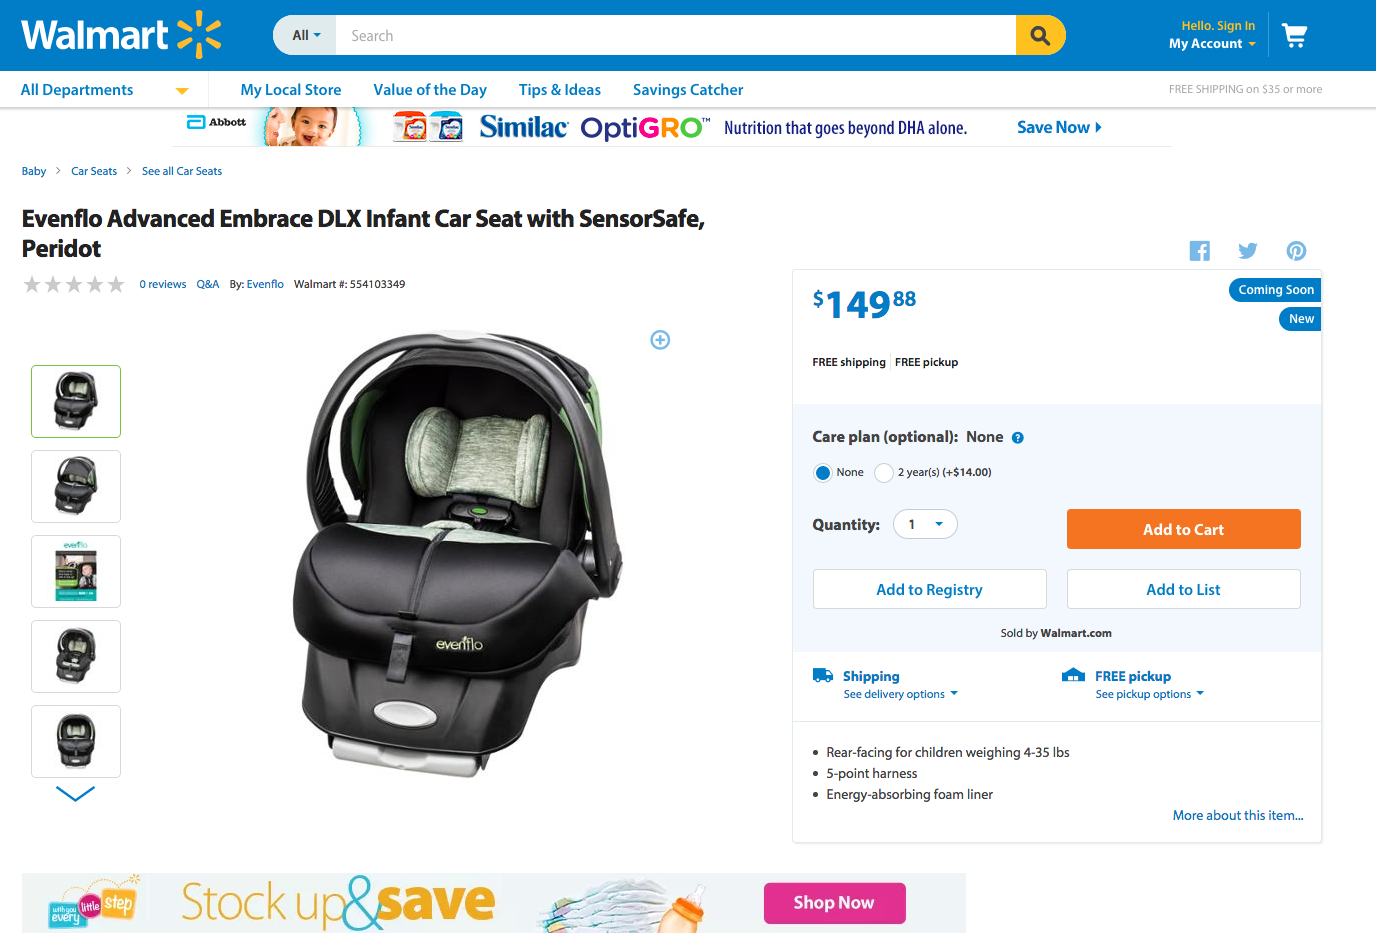 this new car seat with sensorsafe technology can save your babys life and you get it at walmart screen shot 2015 07 24 6 01 p